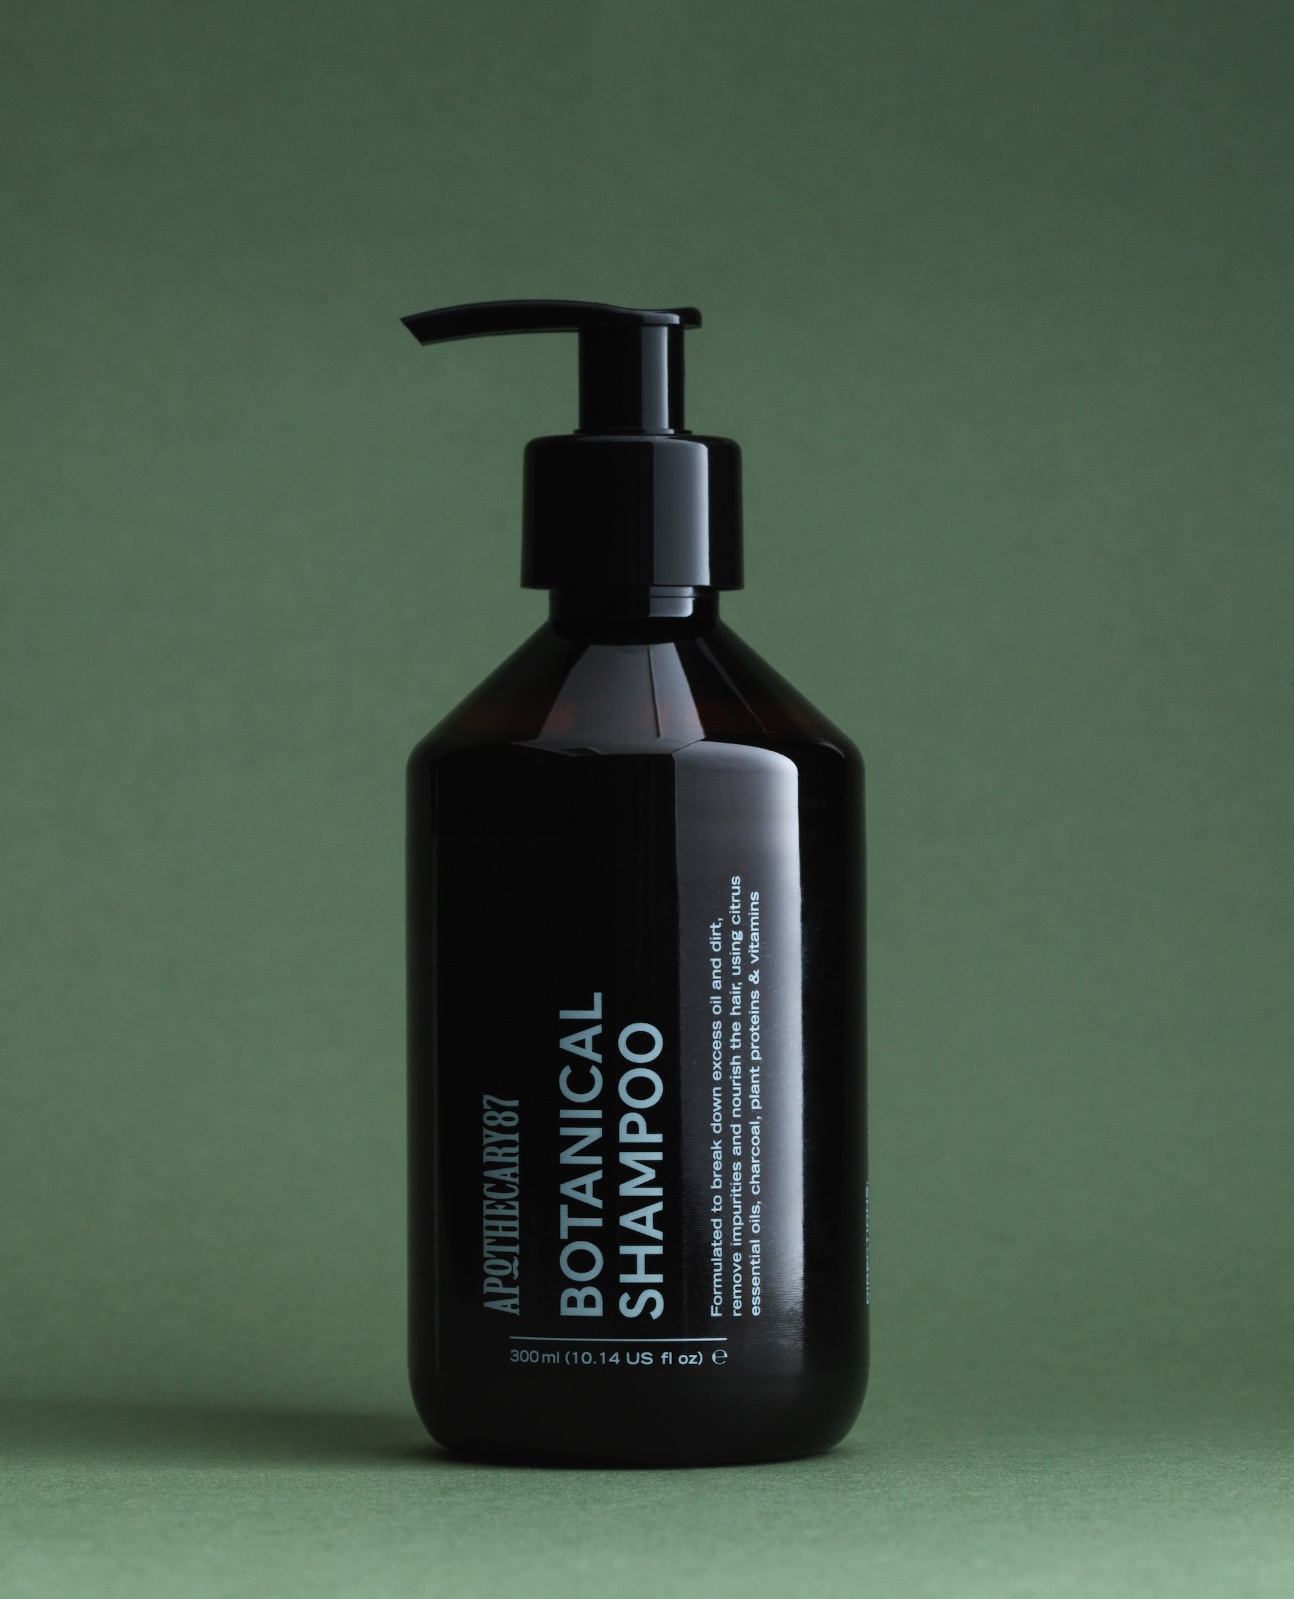 A brown bottle of Apothecary 87 Botanical Shampoo on a green studio background. Packaging design by 93ft.